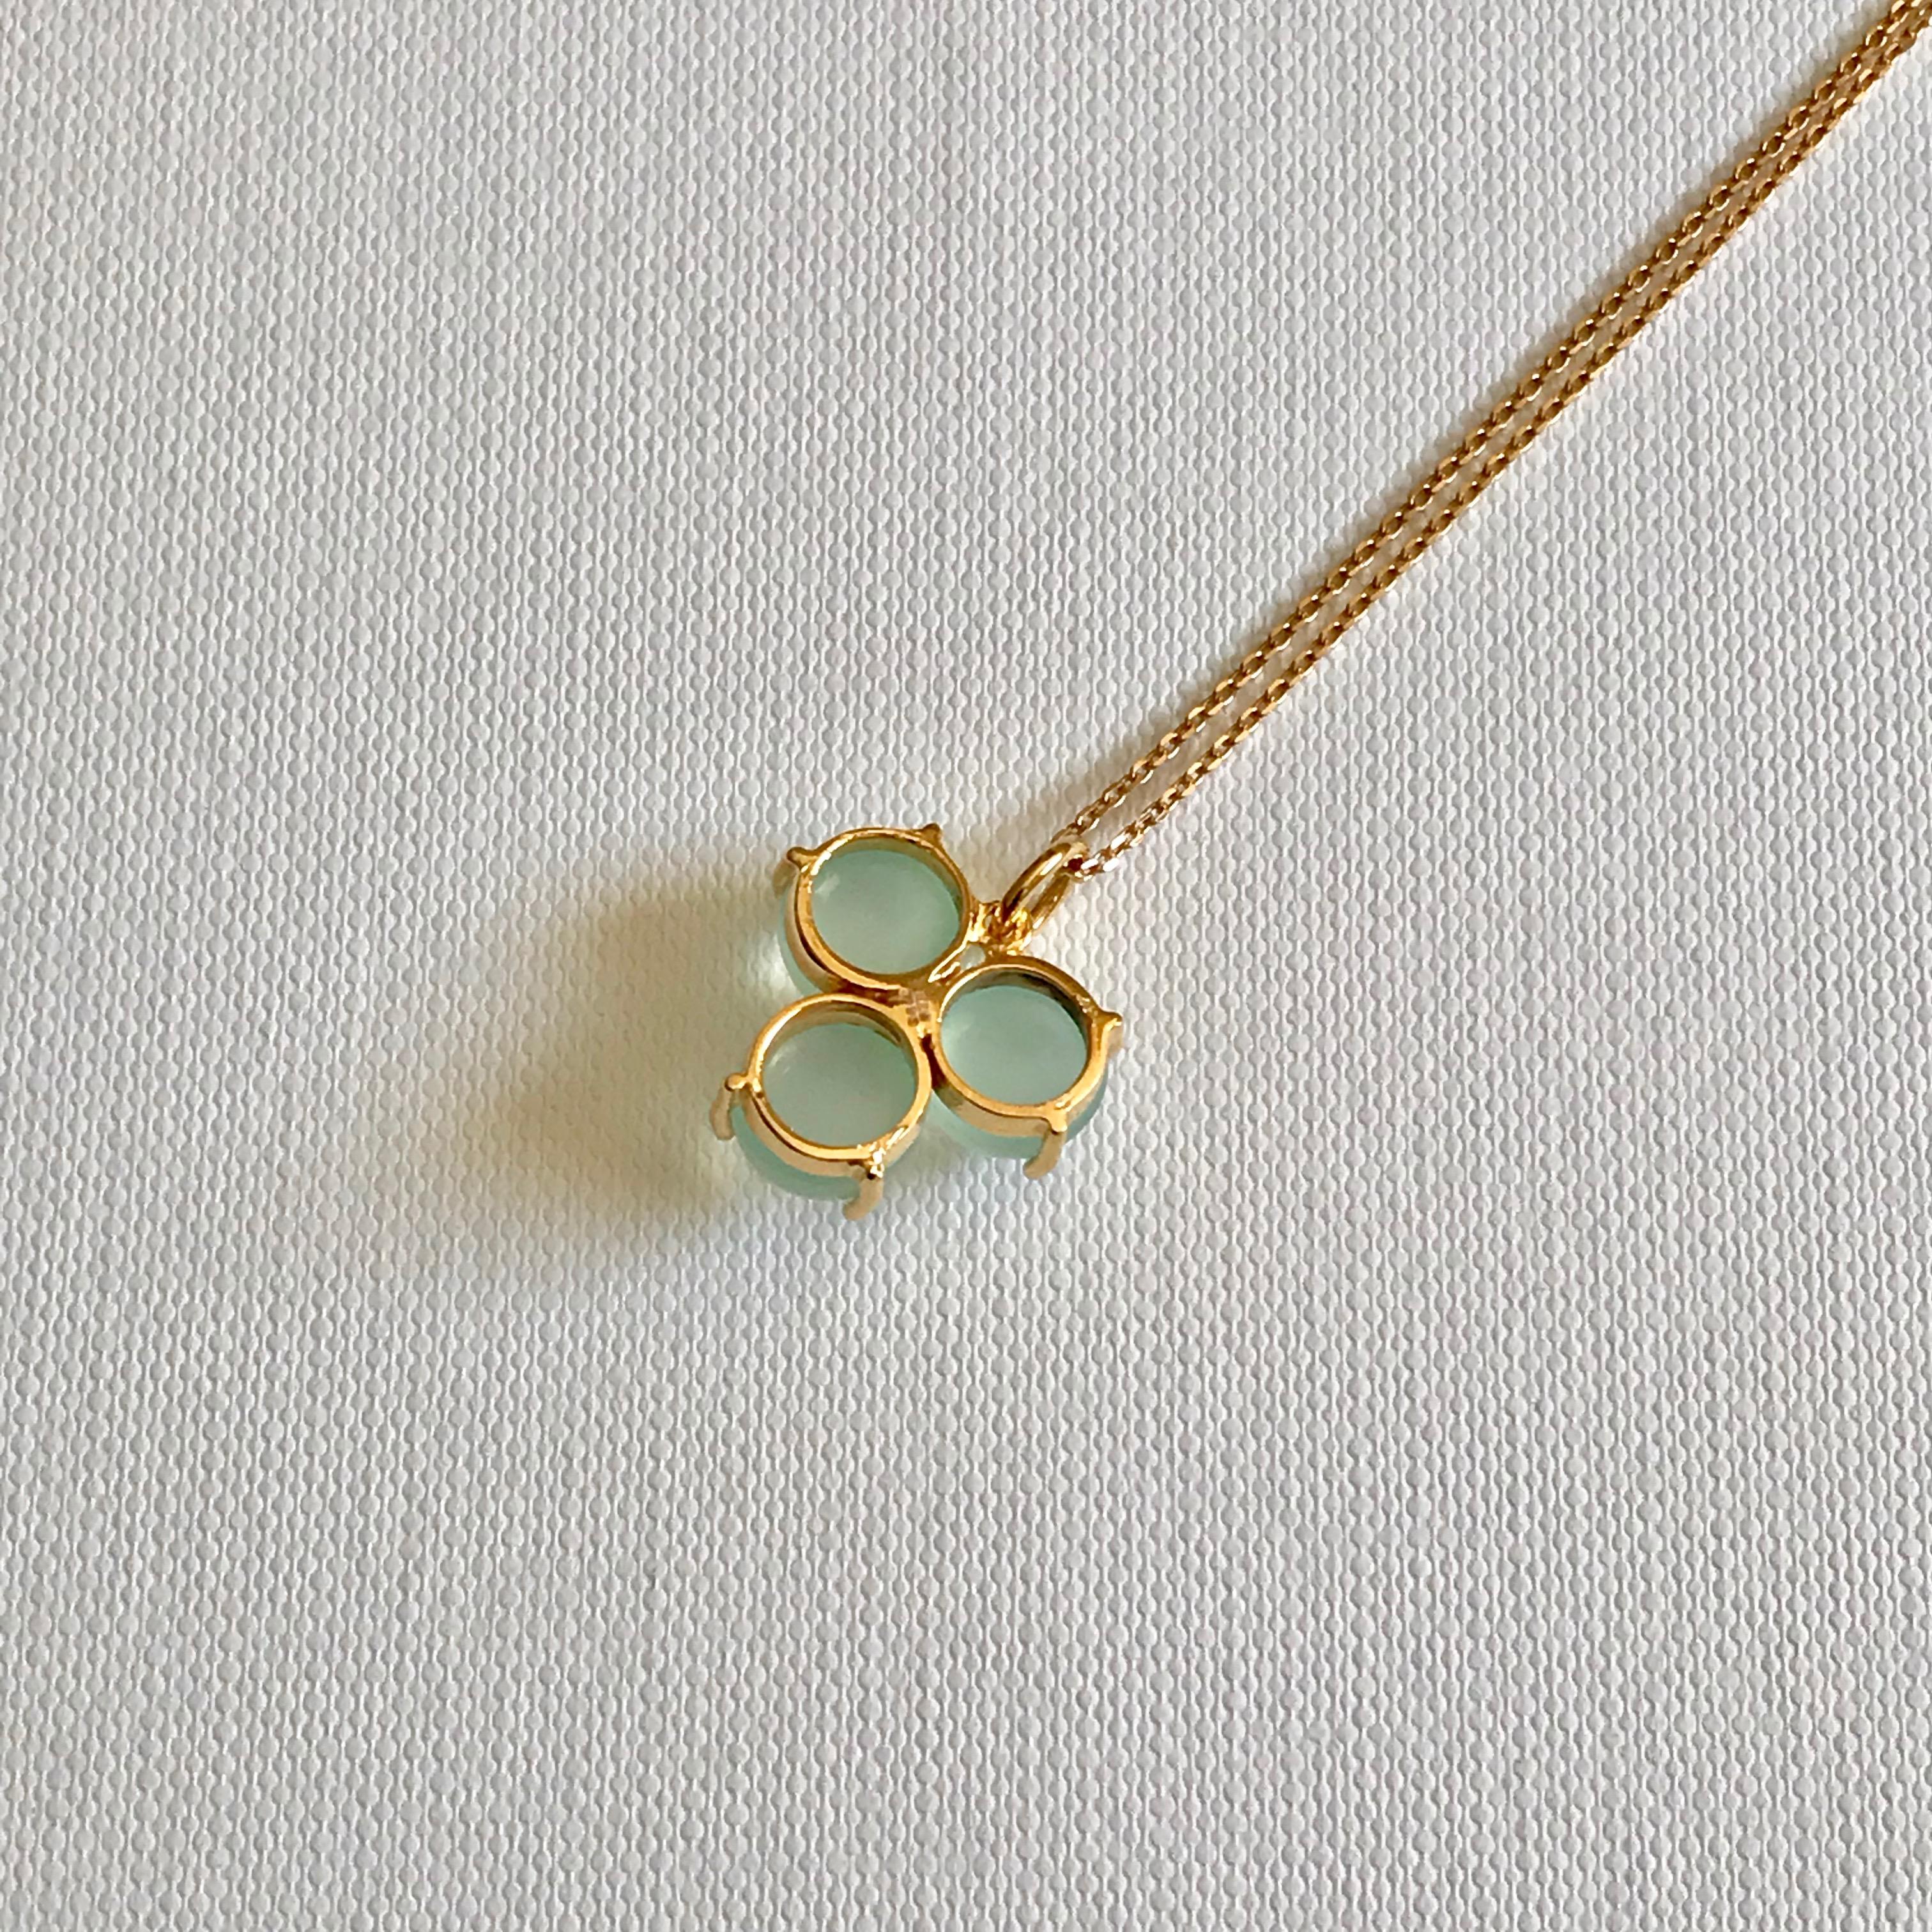 Cabochon Handmade 18 Karat Solid Yellow Gold Blue Blossom Charm Chain Pendant Necklace For Sale